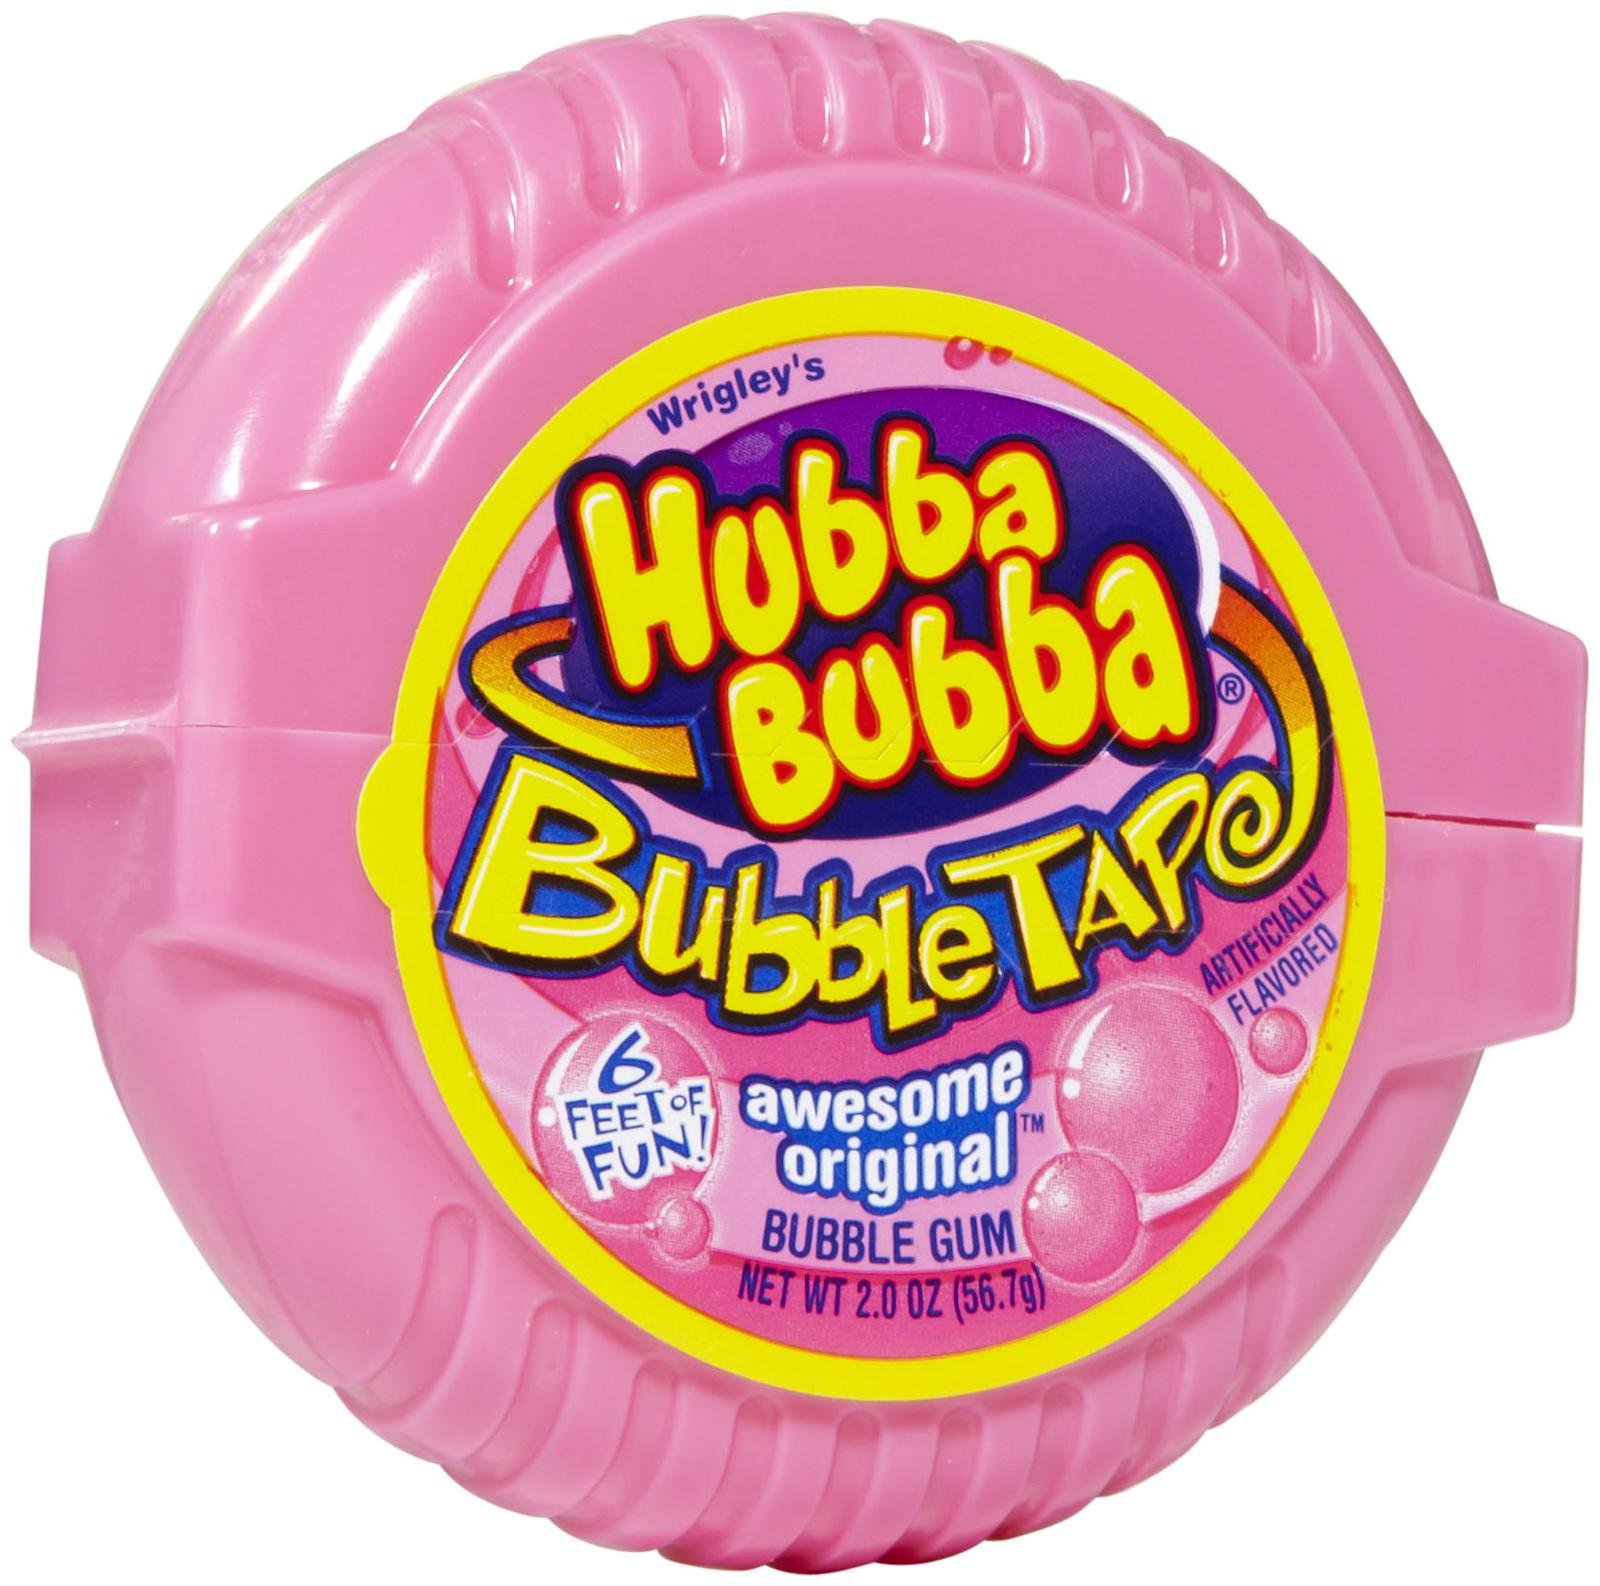 hubba bubba meets new hair color trend